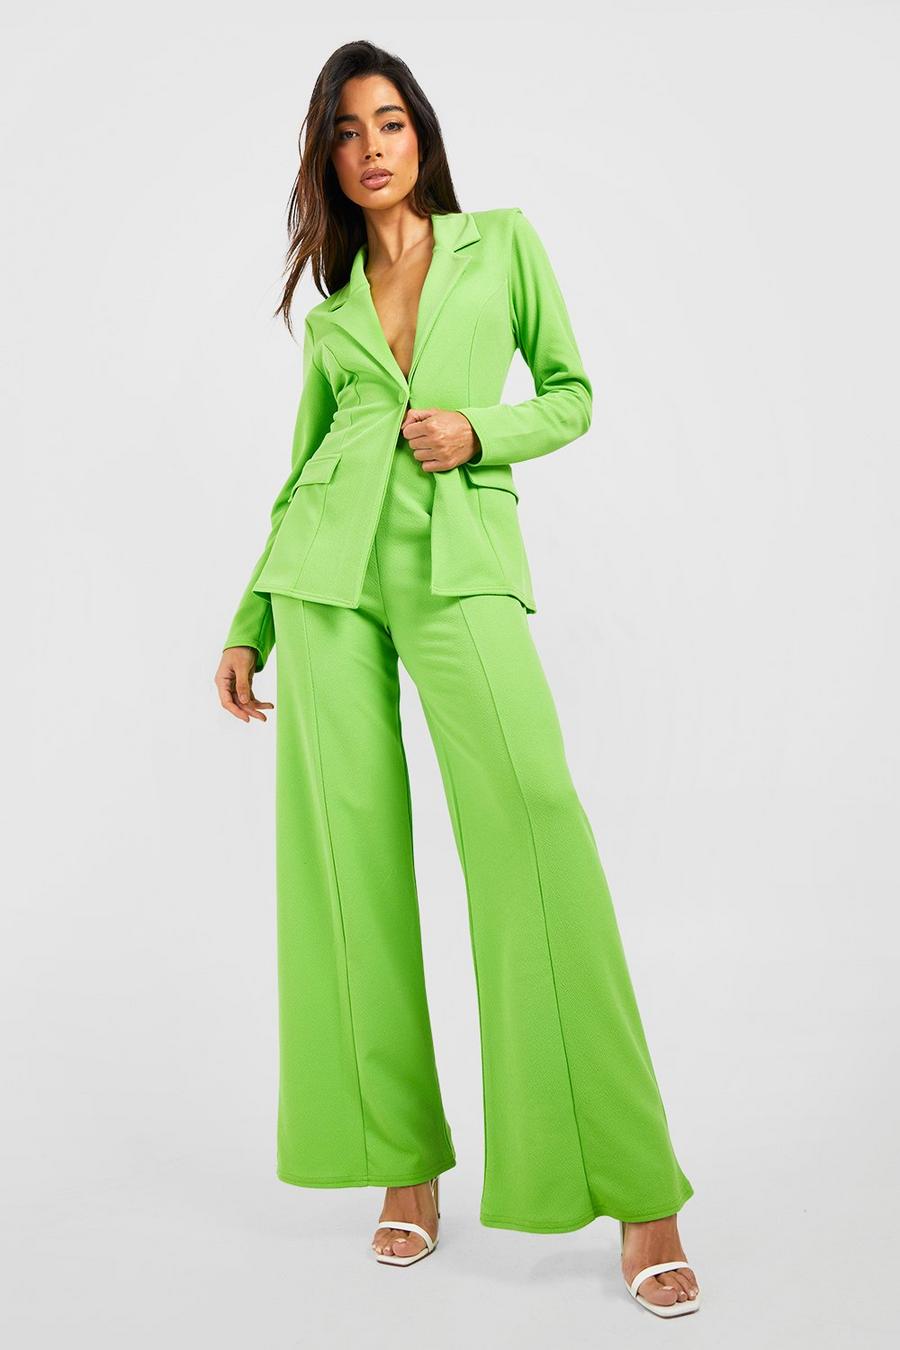 Green palazzo pants outfit  Fashion outfits, Stylish outfits, Bright green  dress